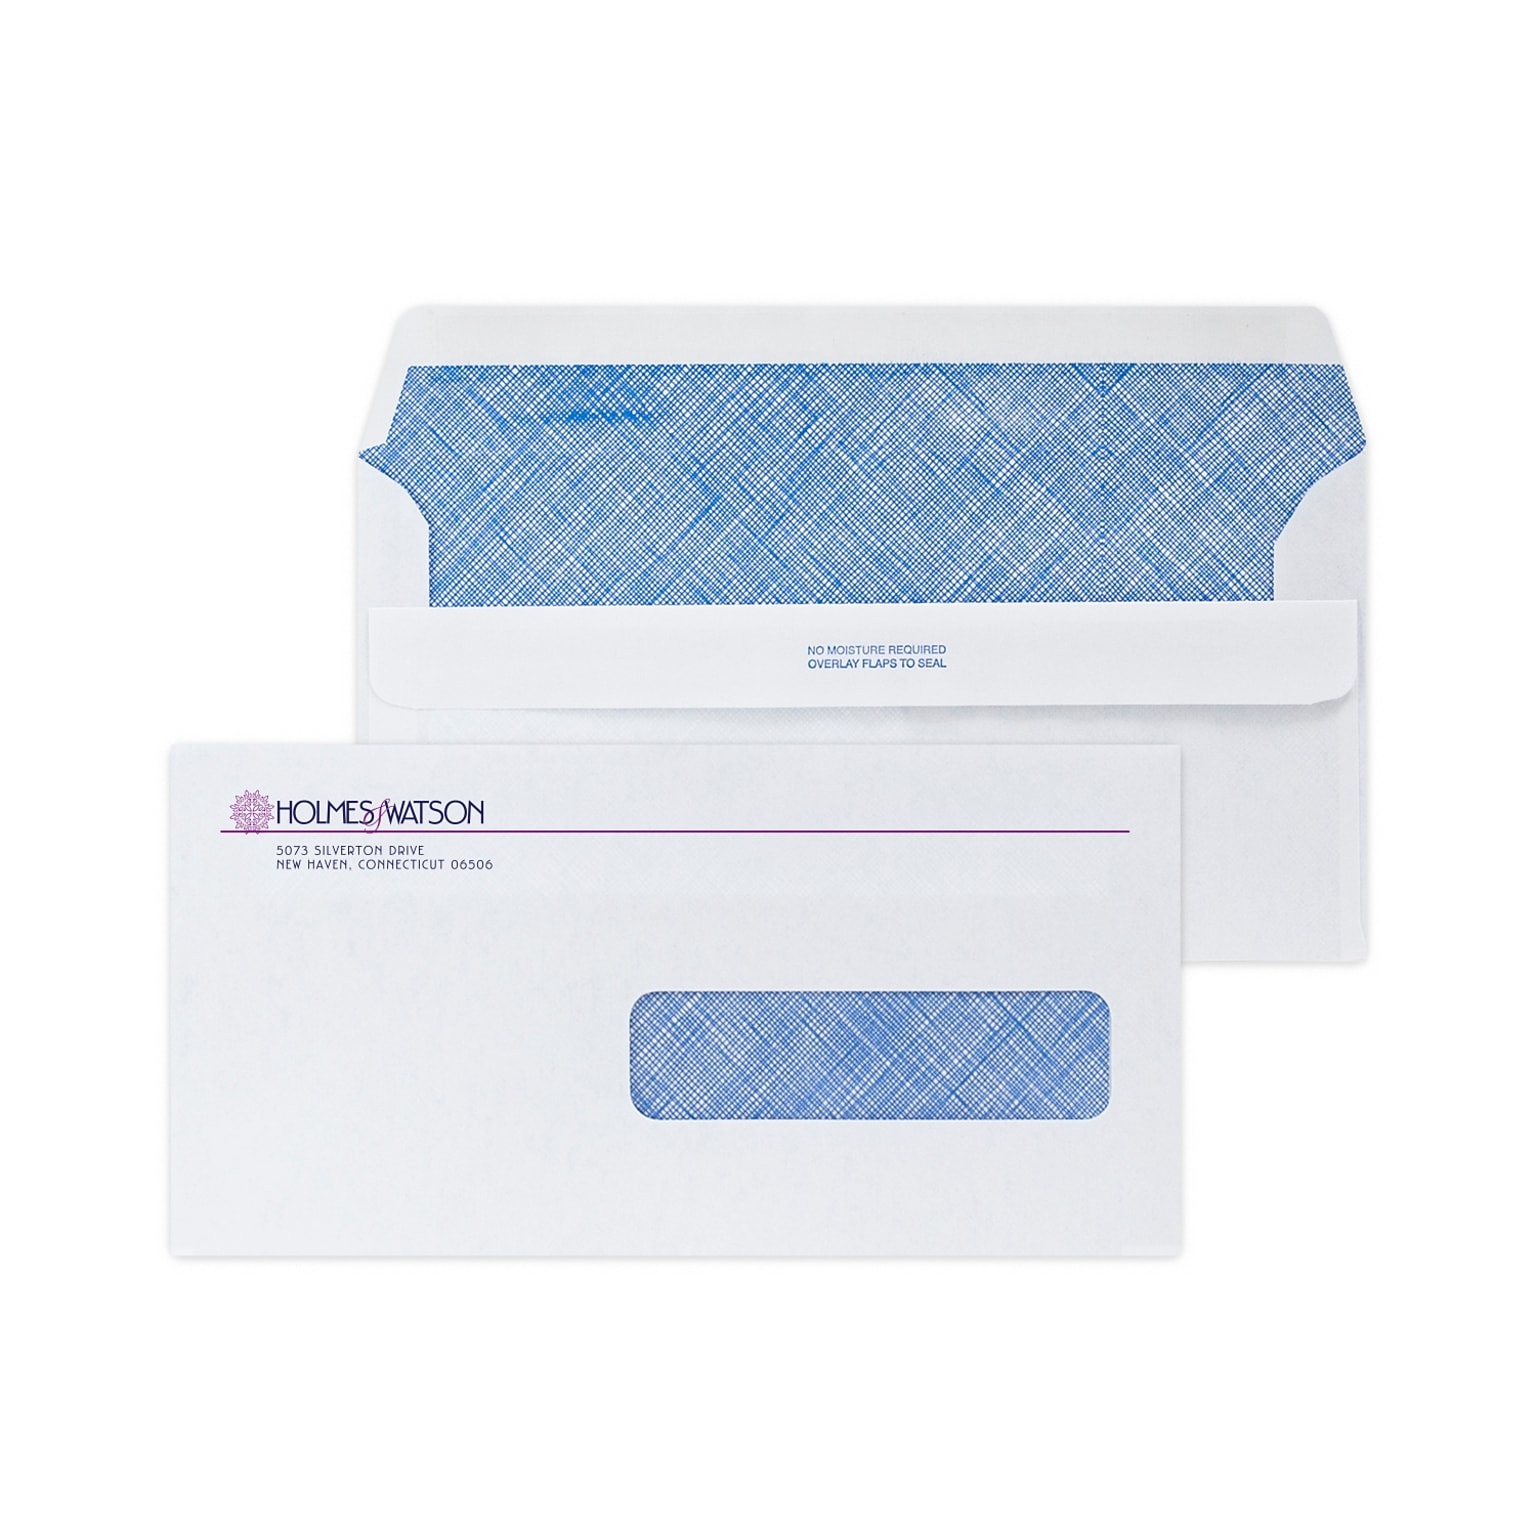 Custom 4-1/2 x 9 Insurance Claim Right Window Self Seal Envelopes with Security Tint, 24# White Wove, 2 Custom Inks, 250/Pack